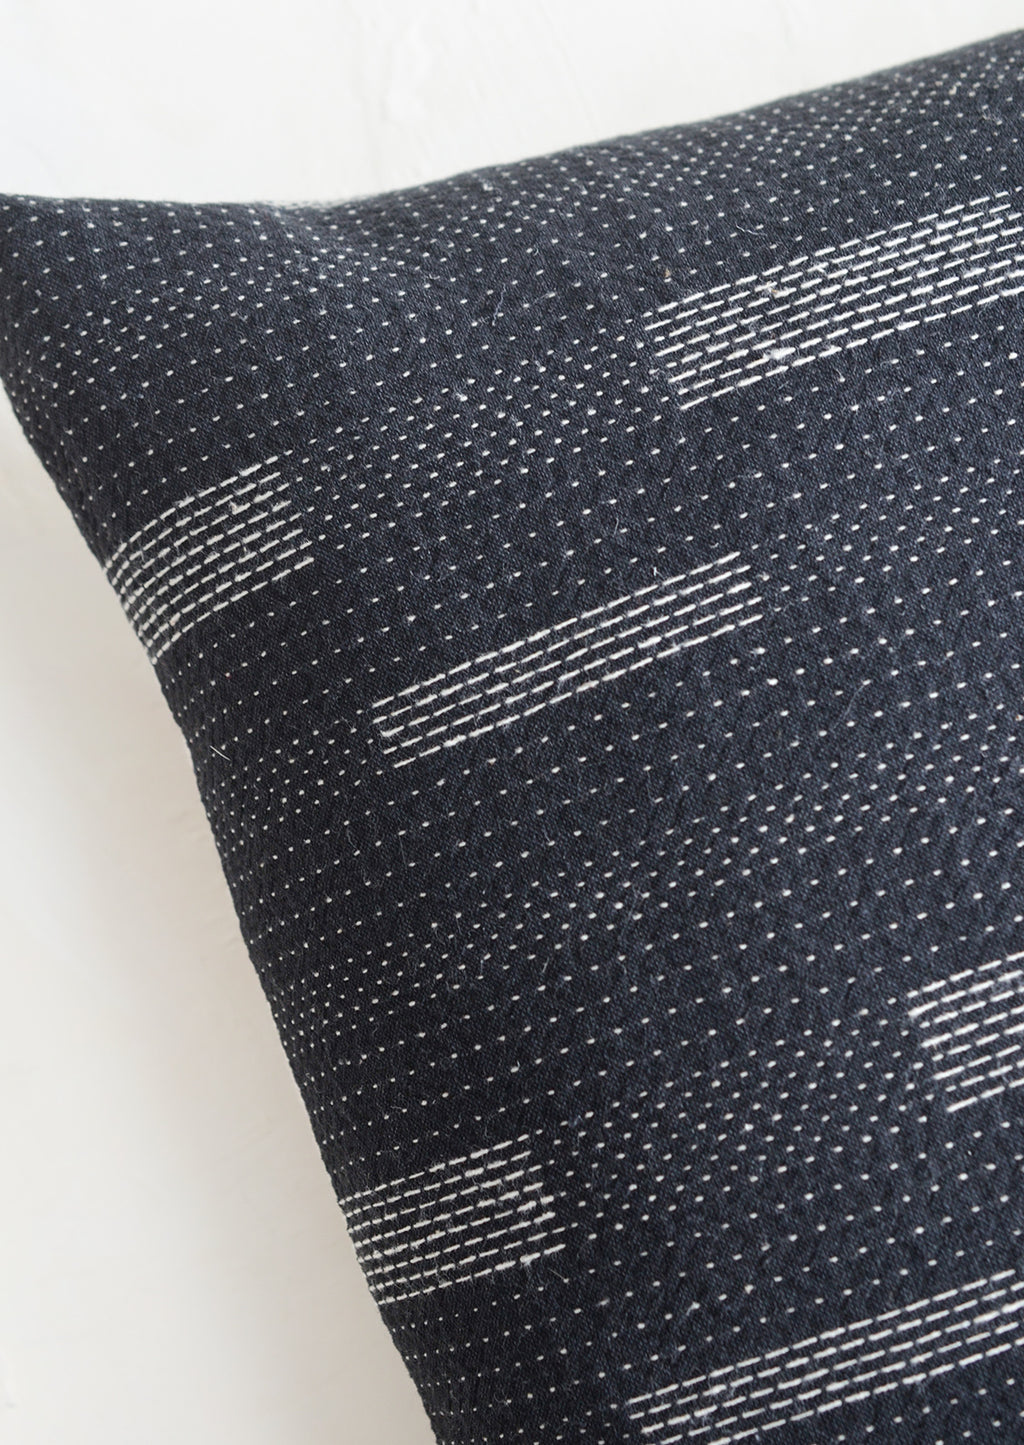 4: Square pillow in black with white variegated stitching in assorted line patterns